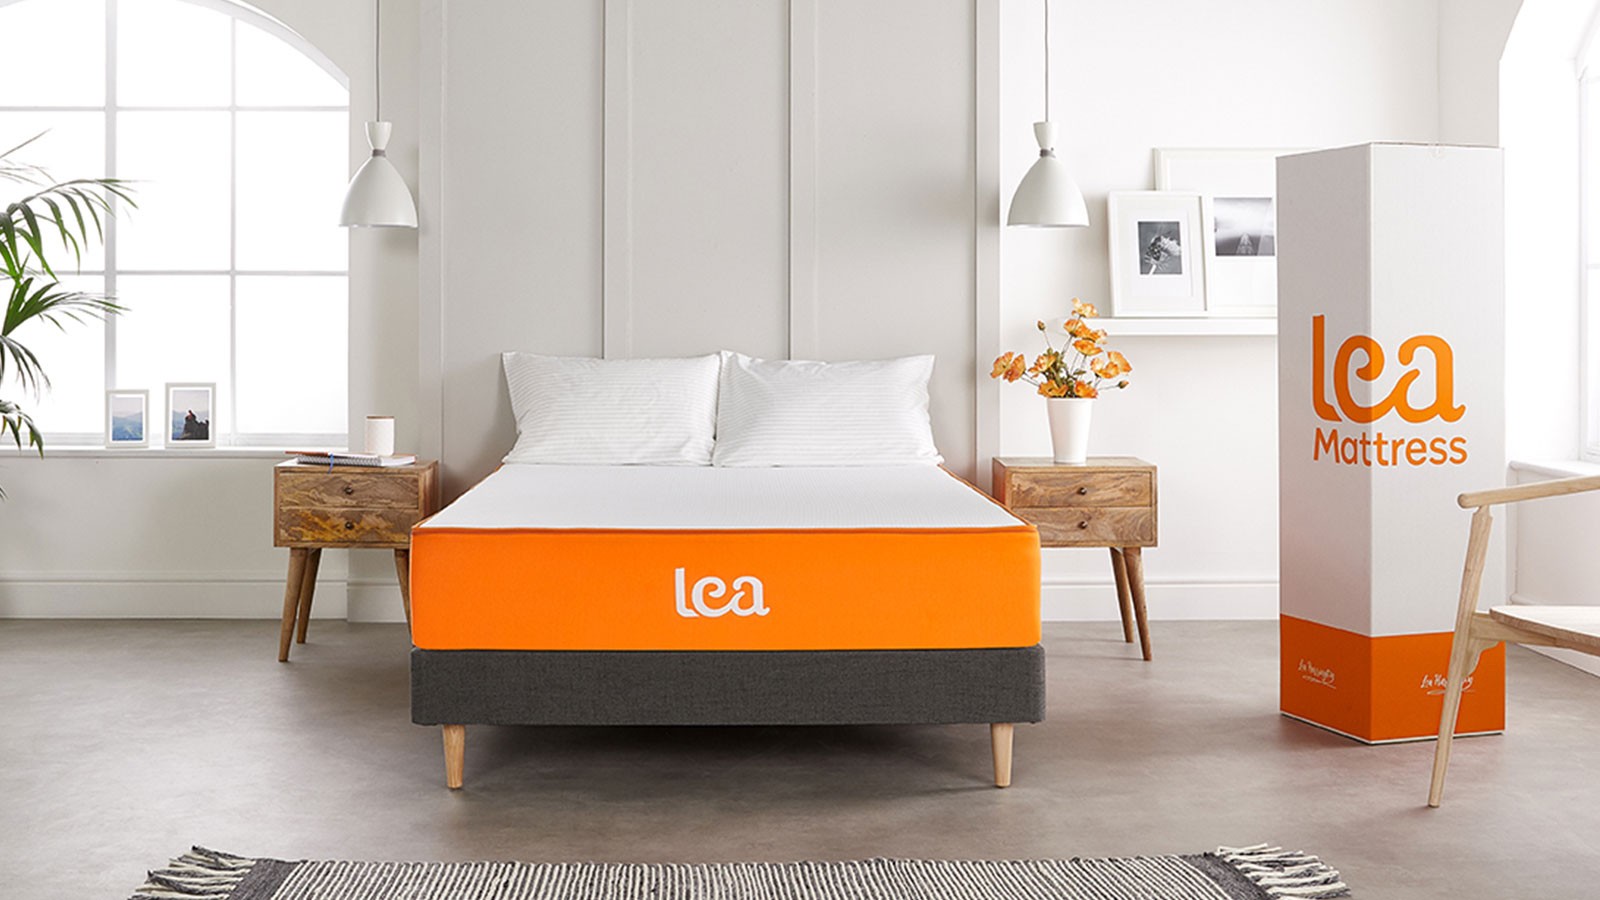 The Ergonomic Plus mattress combines layers of memory and support foam, creating a mattress that provides great comfort and support. Easily delivered to your doorsteps as a mattress in a box, the Ergonomic Plus will provide you with cloud-like comfort to your whole body.